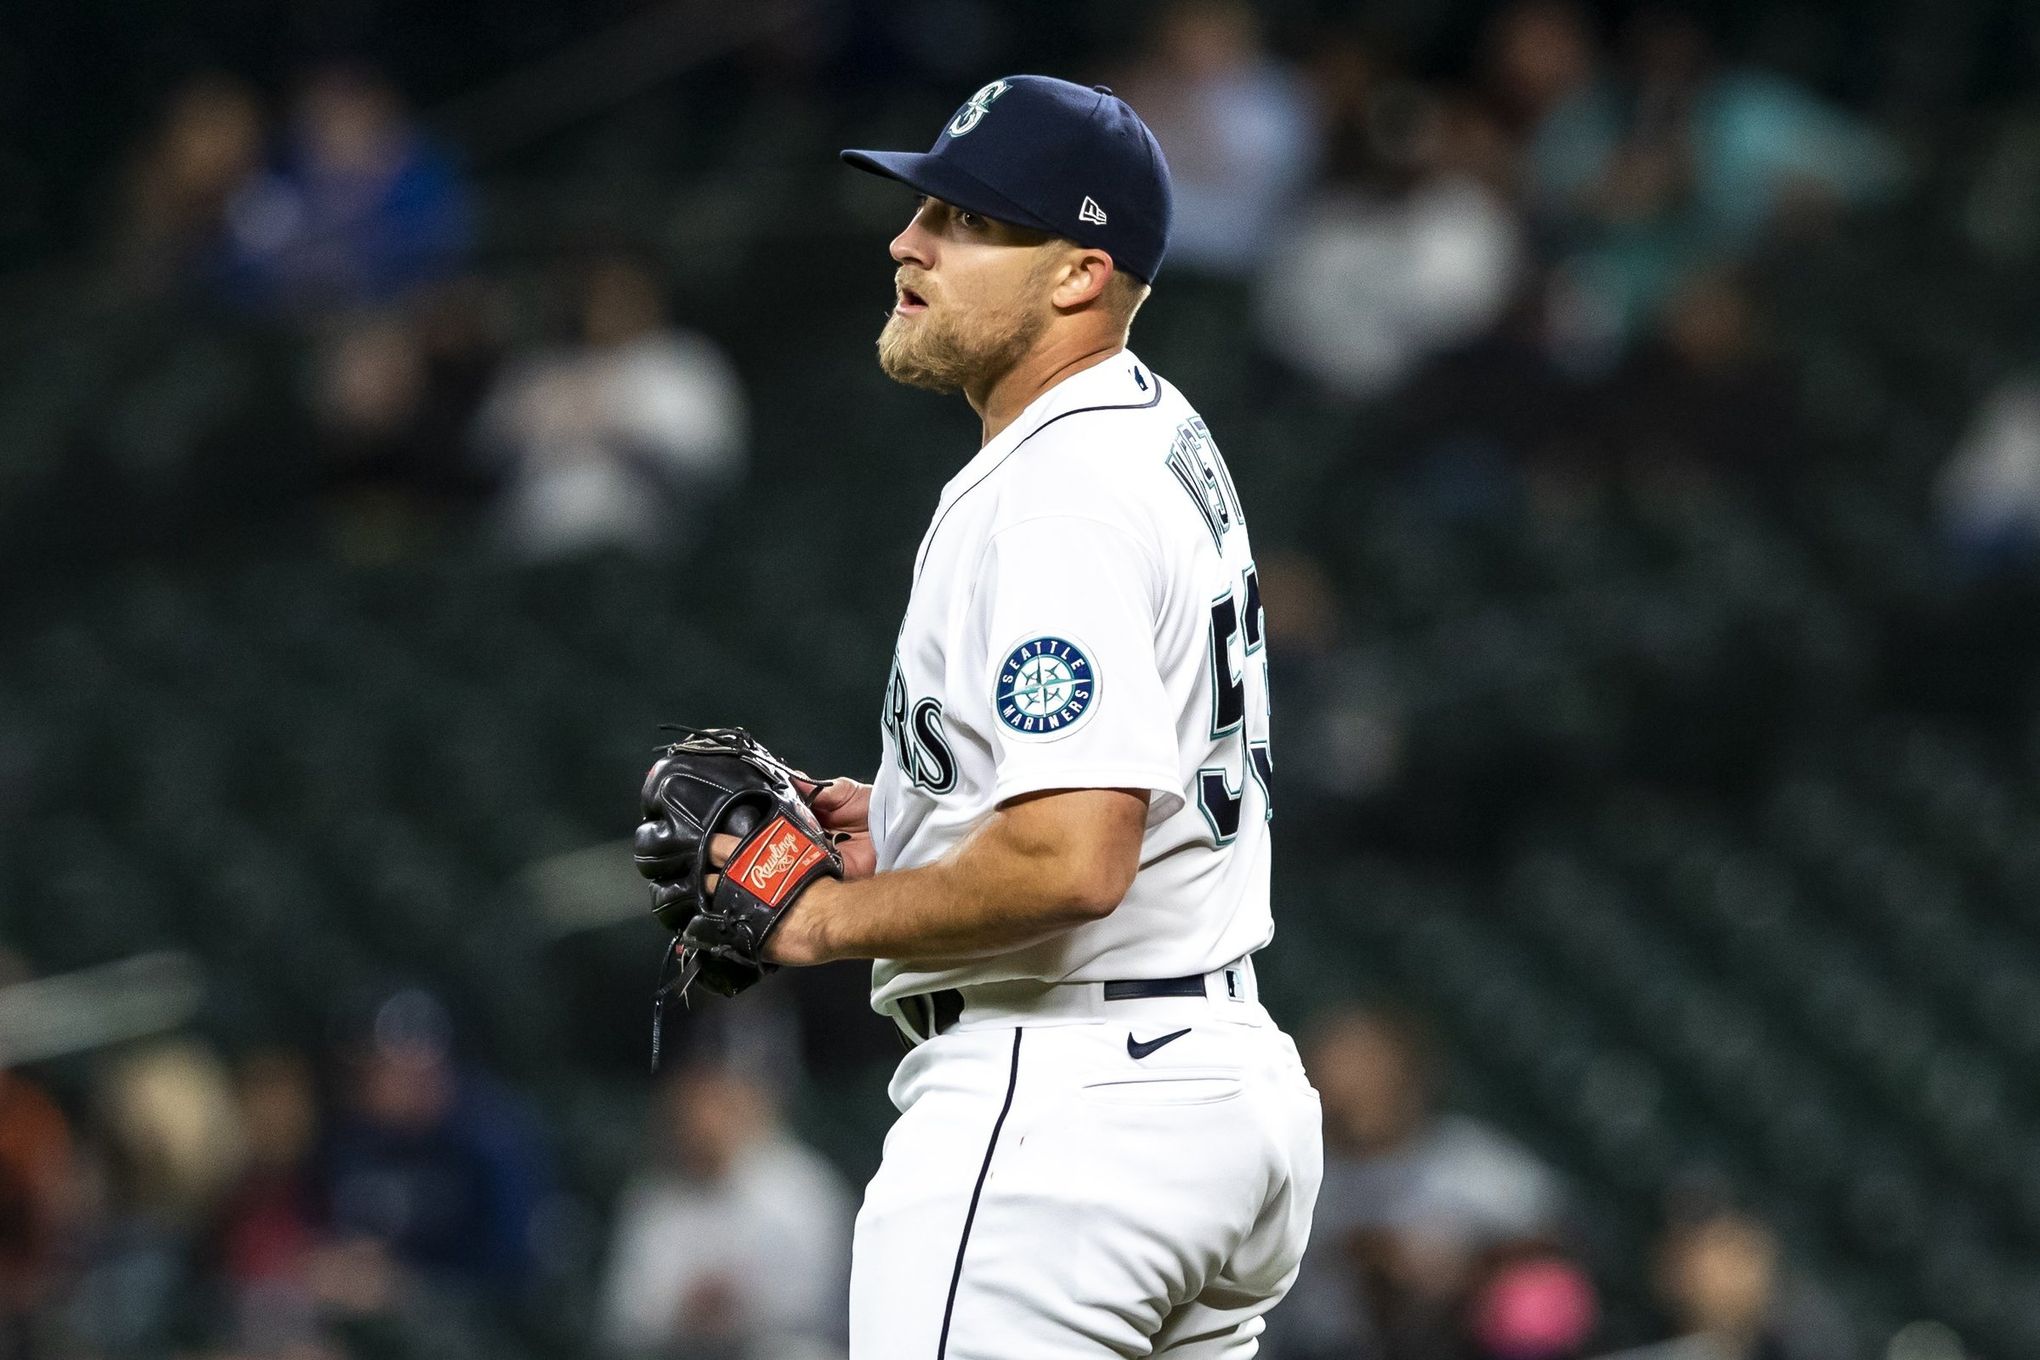 Mariners rookie Will Vest able to check off one of major goals in MLB debut